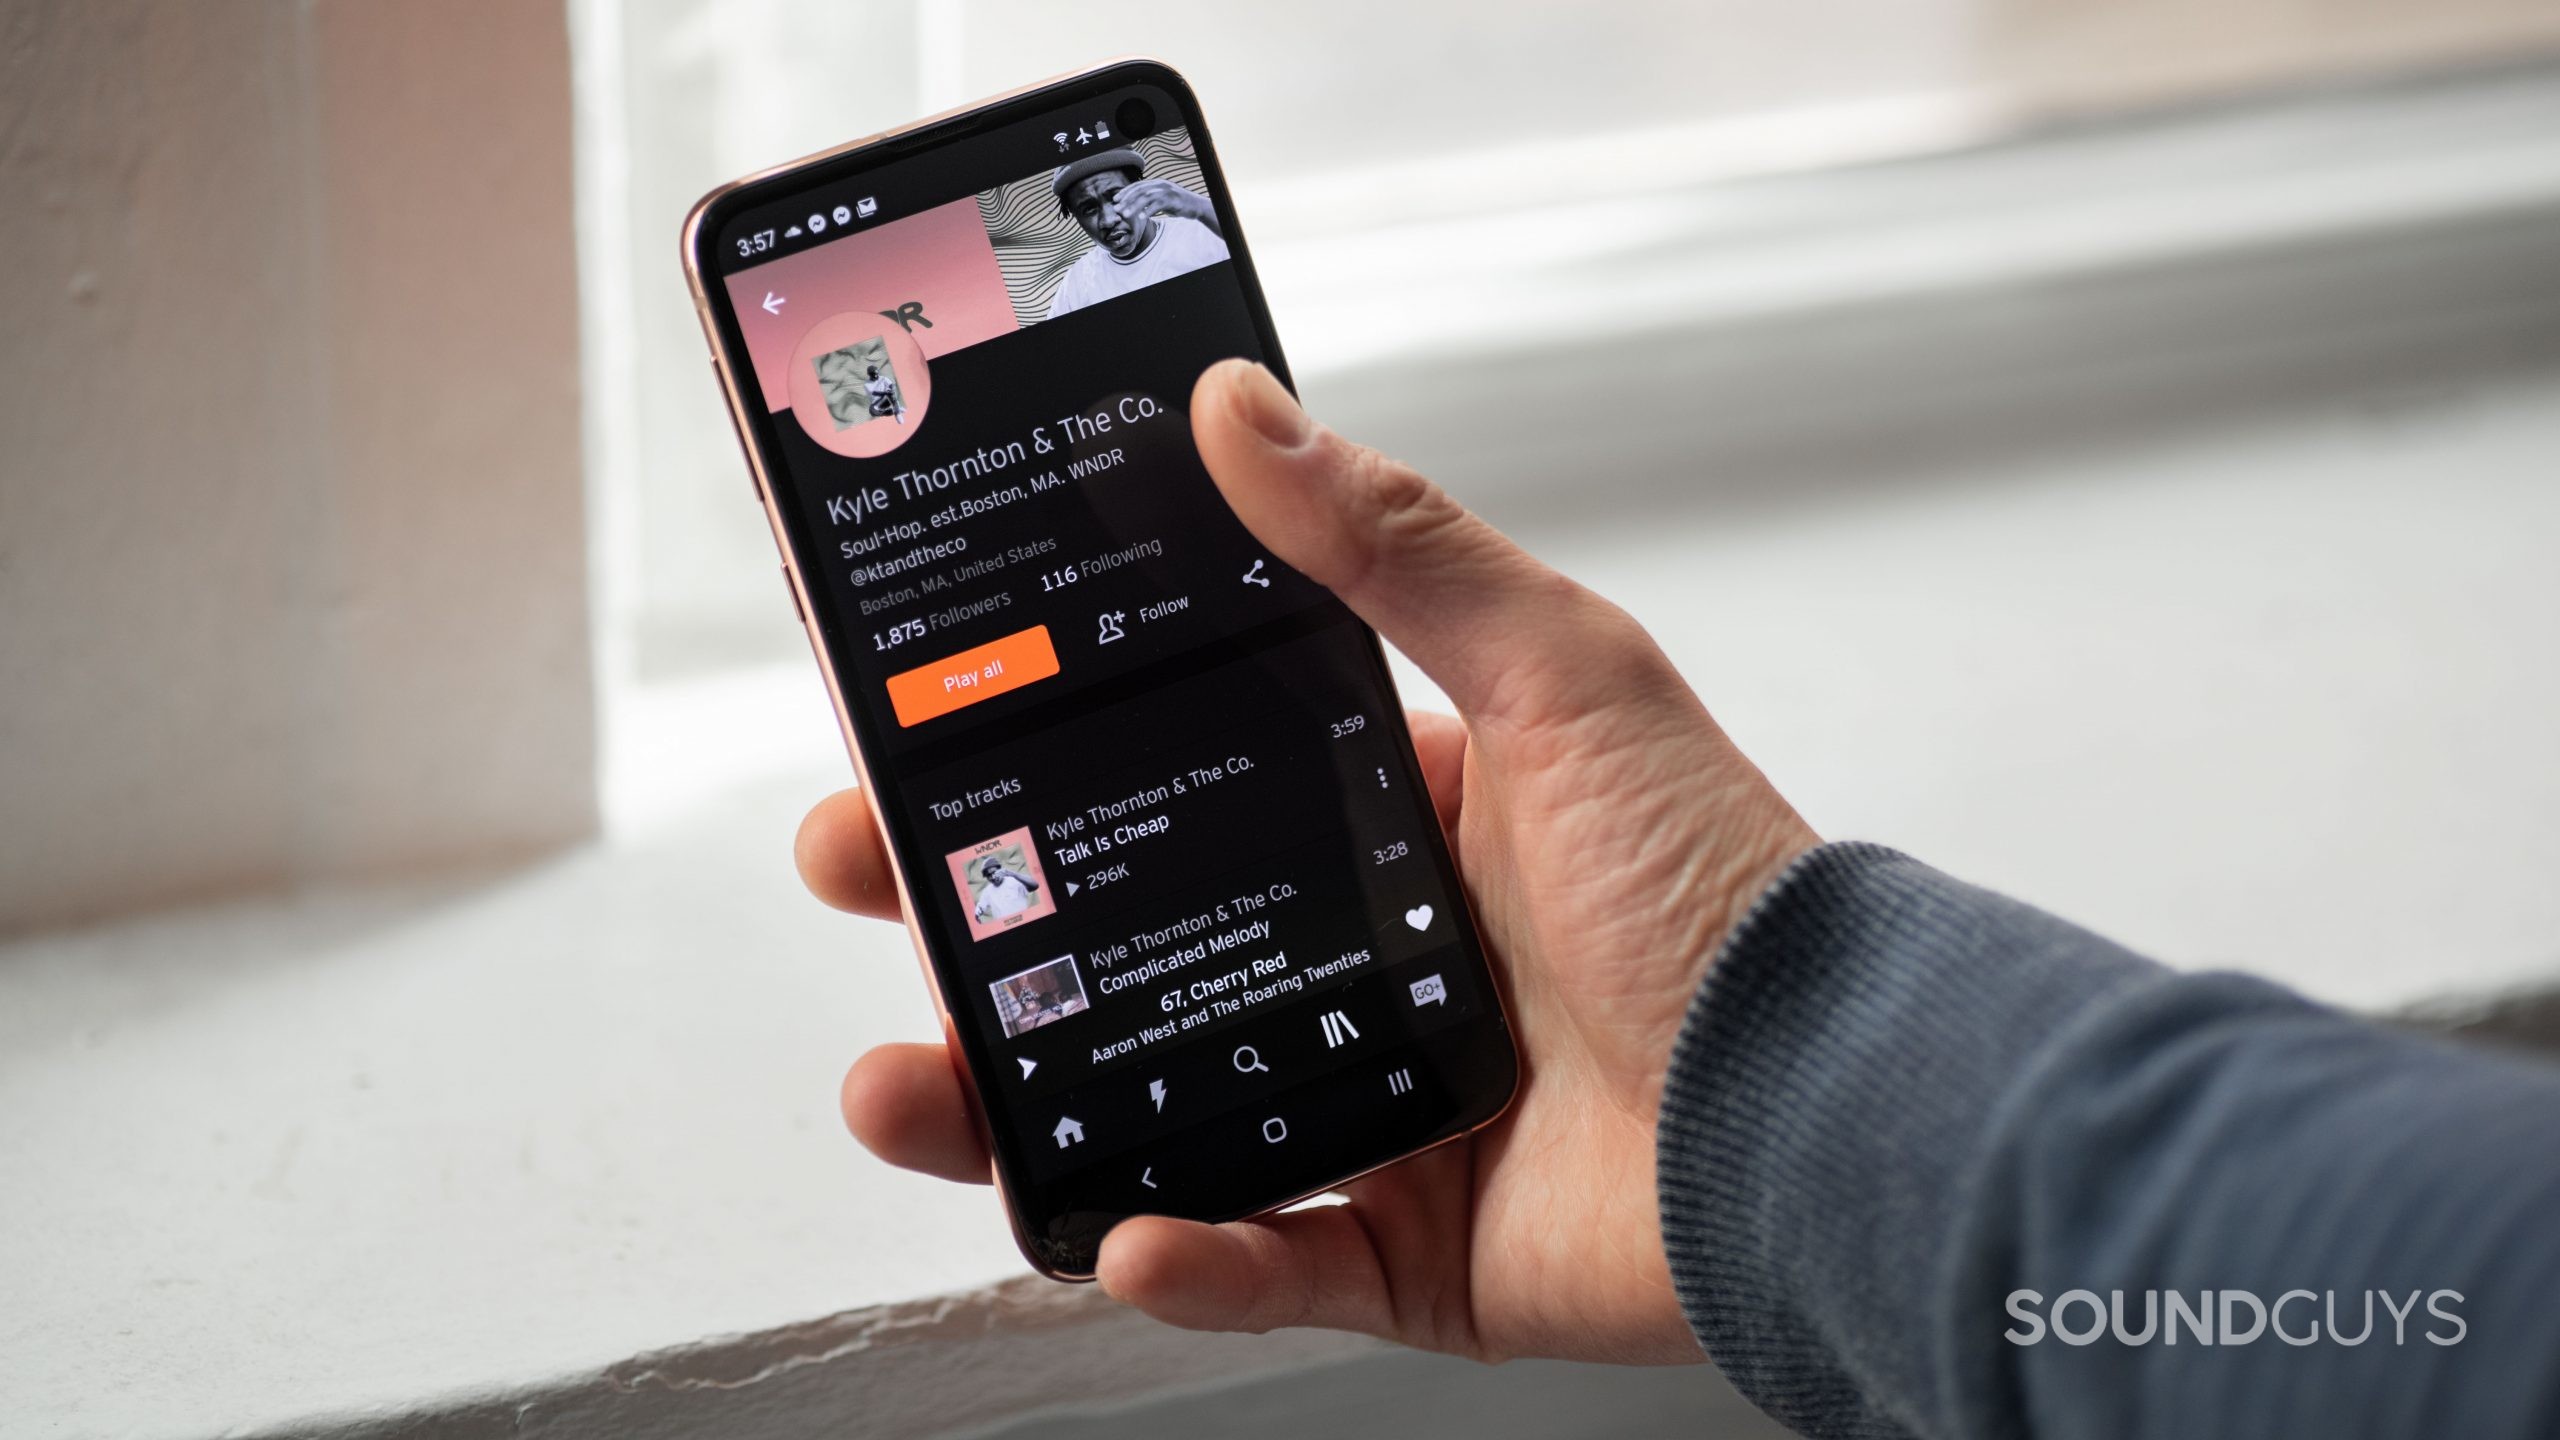 A hand holds a smartphone with the Spotify app open to a specific artist page.